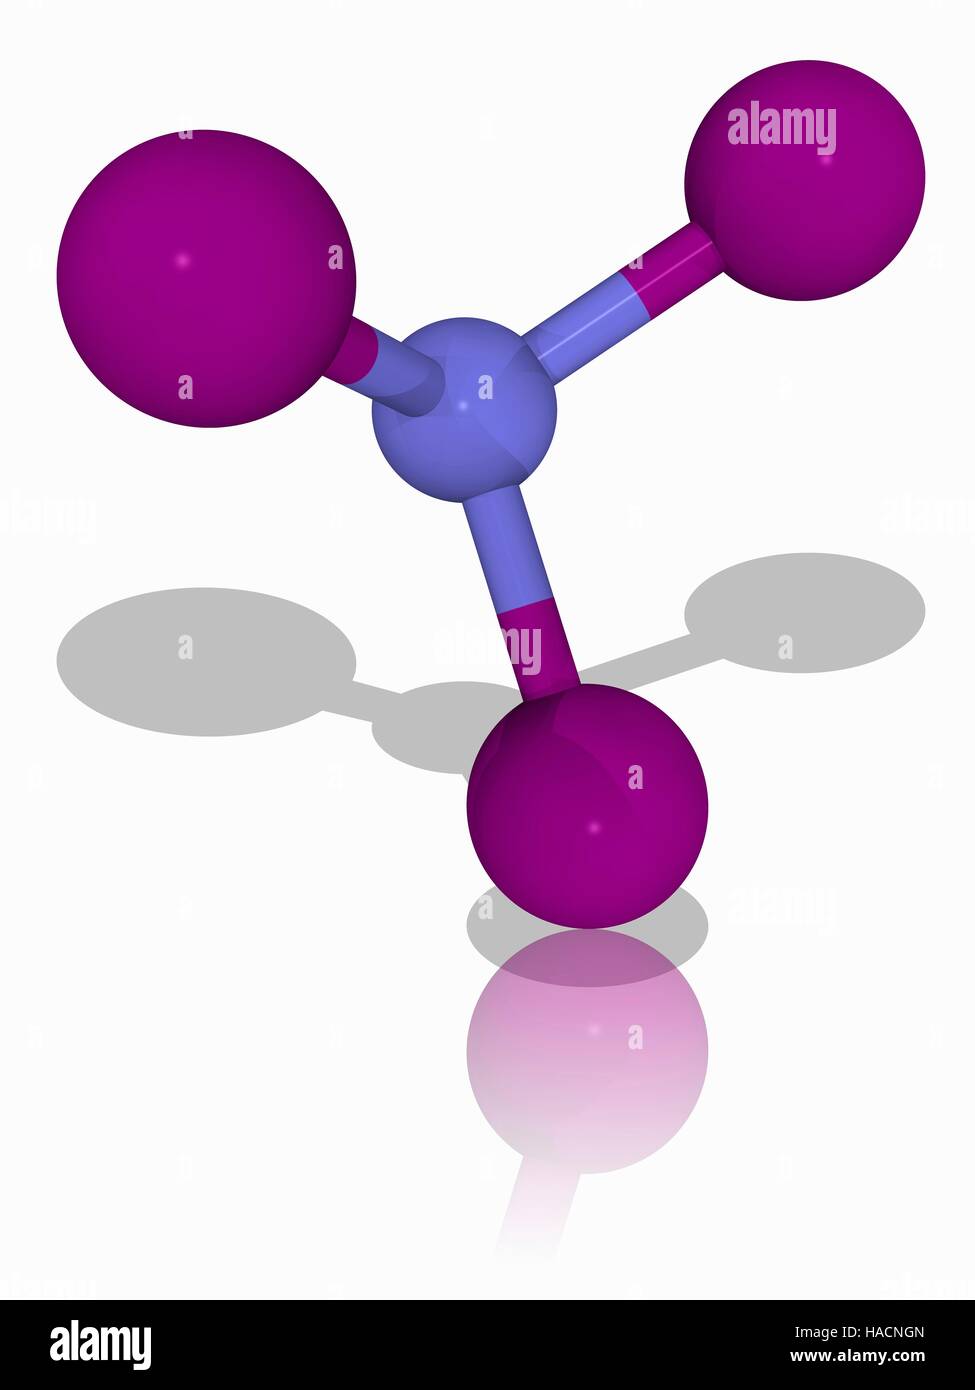 Nitrogen triiodide. Molecular model of the explosive chemical nitrogen triiodide (N.I3). This explosive is extremely sensitive to shocks. Atoms are represented as spheres and are colour-coded: nitrogen (blue) and iodine (violet). Illustration. Stock Photo